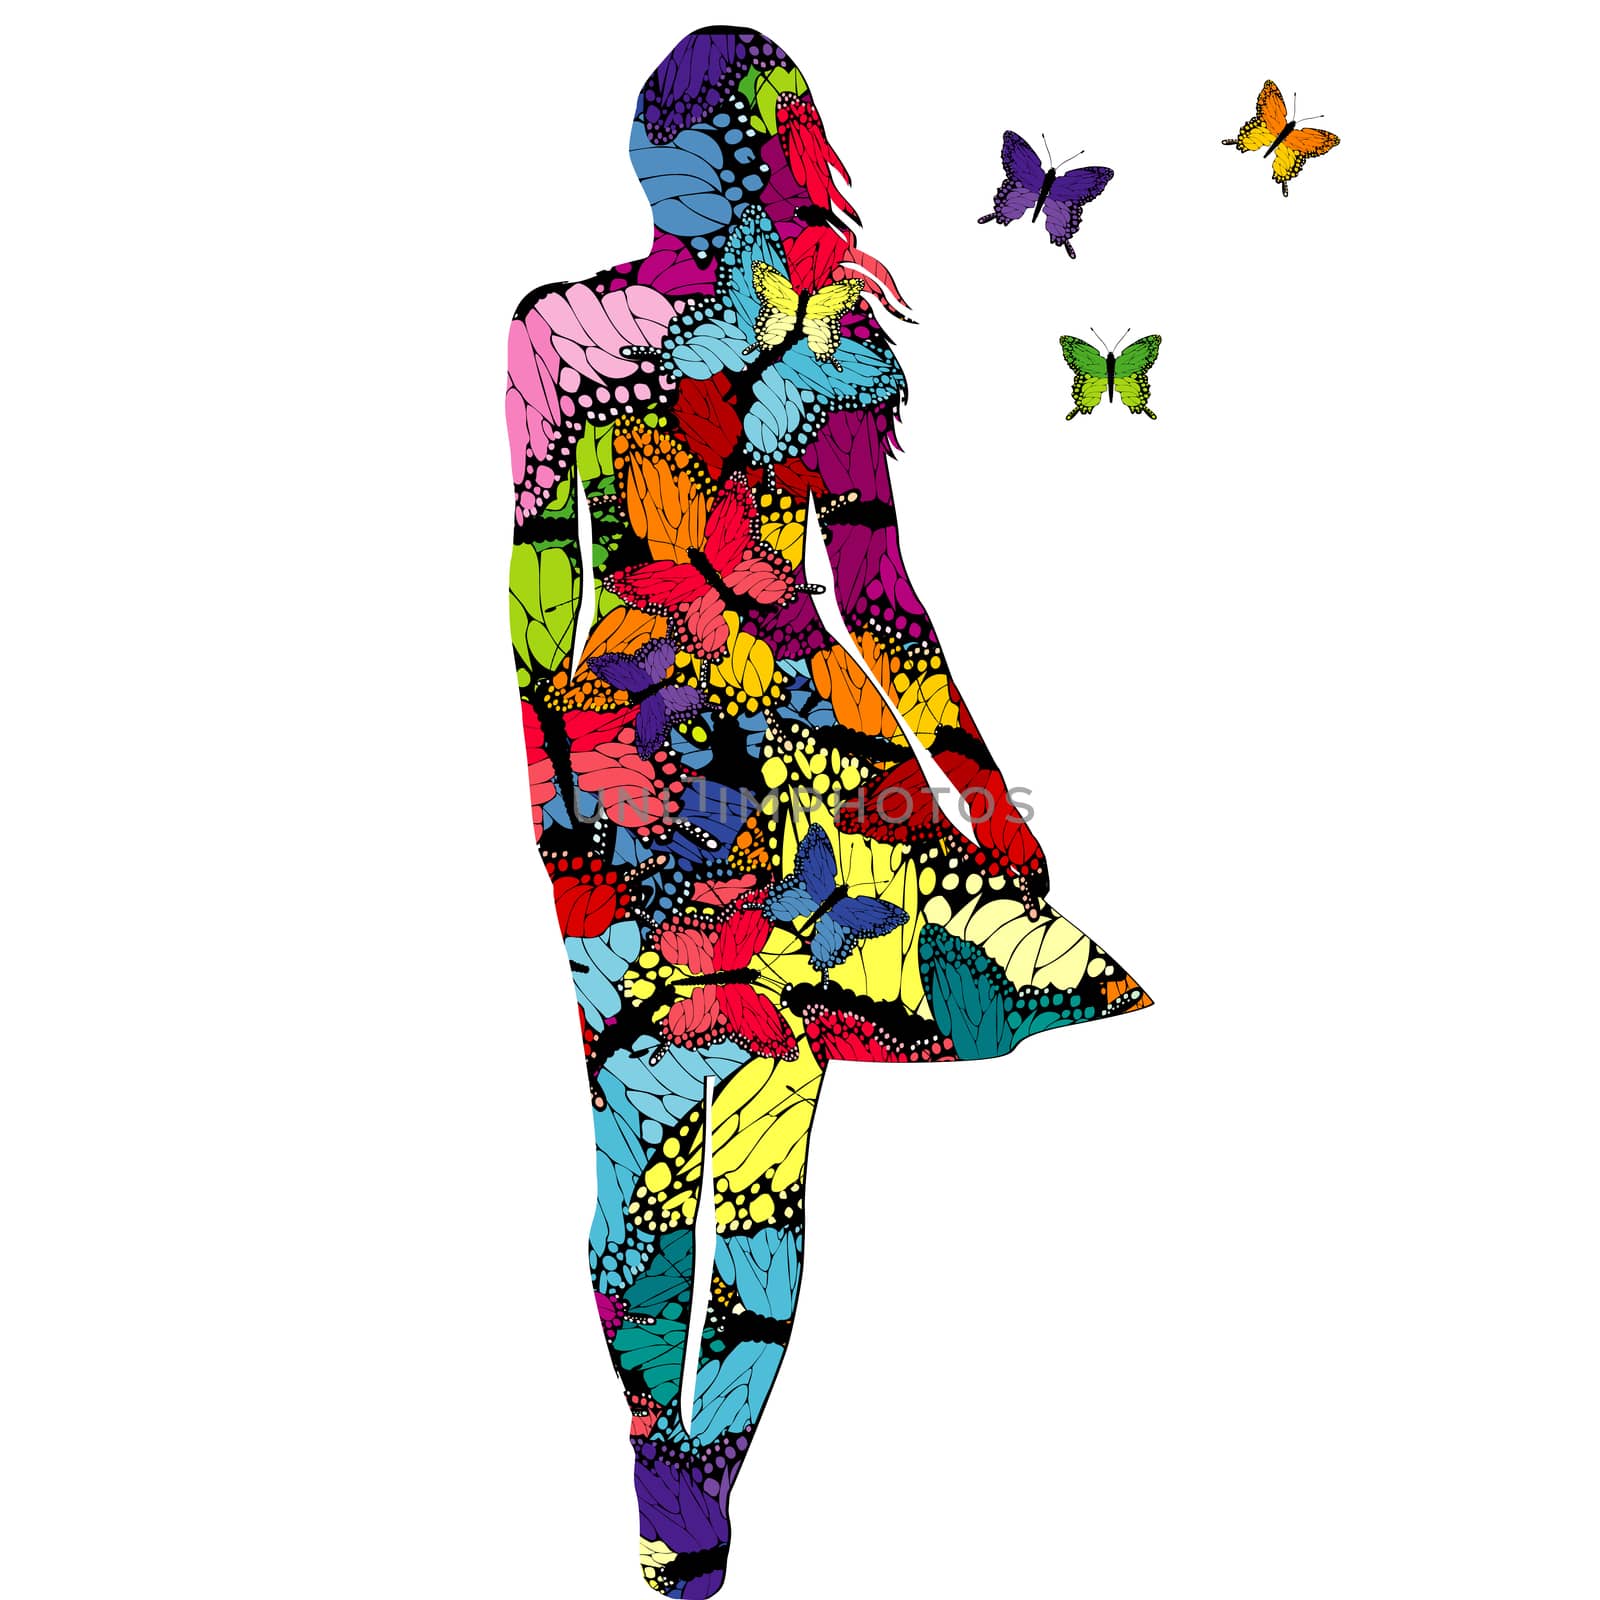 Abstract woman with colored butterflies by hibrida13